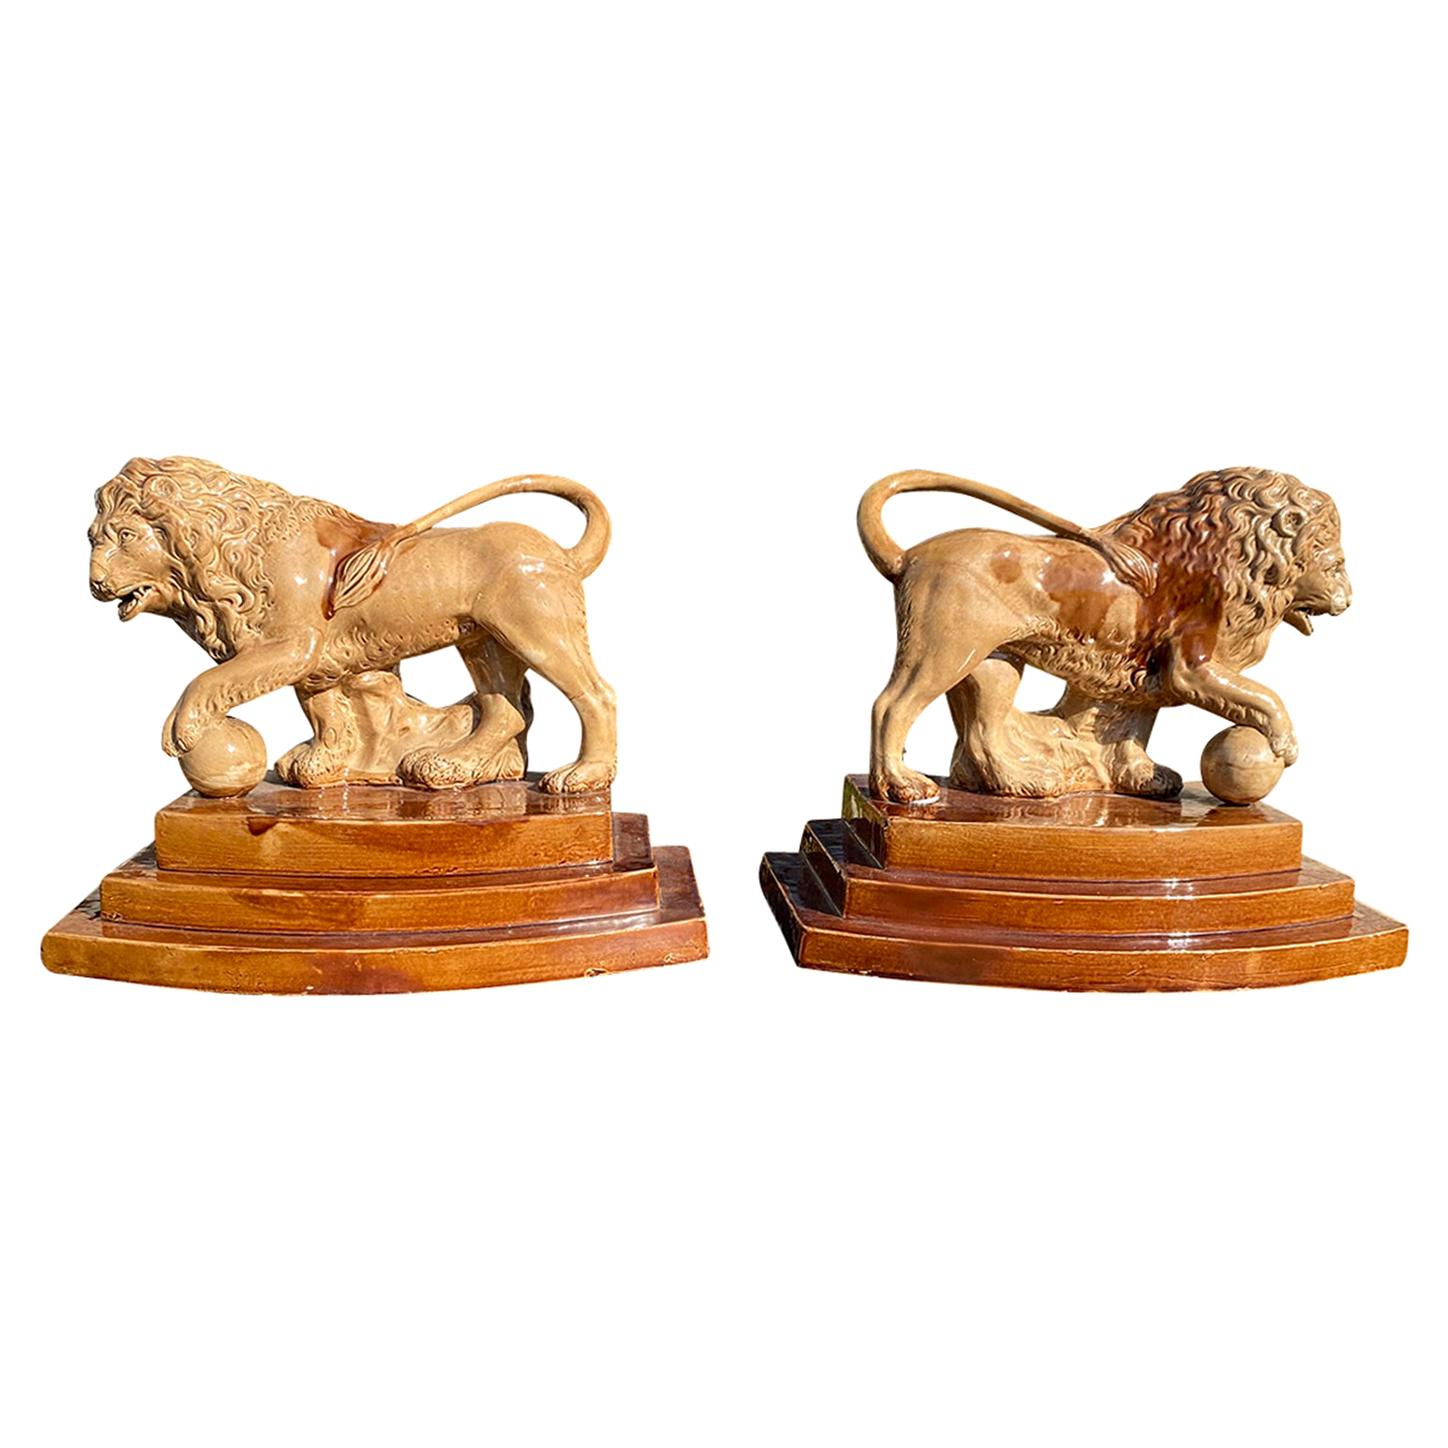 Pair of Circa 1790 English Porcelain Lions, Unusual Form, Unmarked